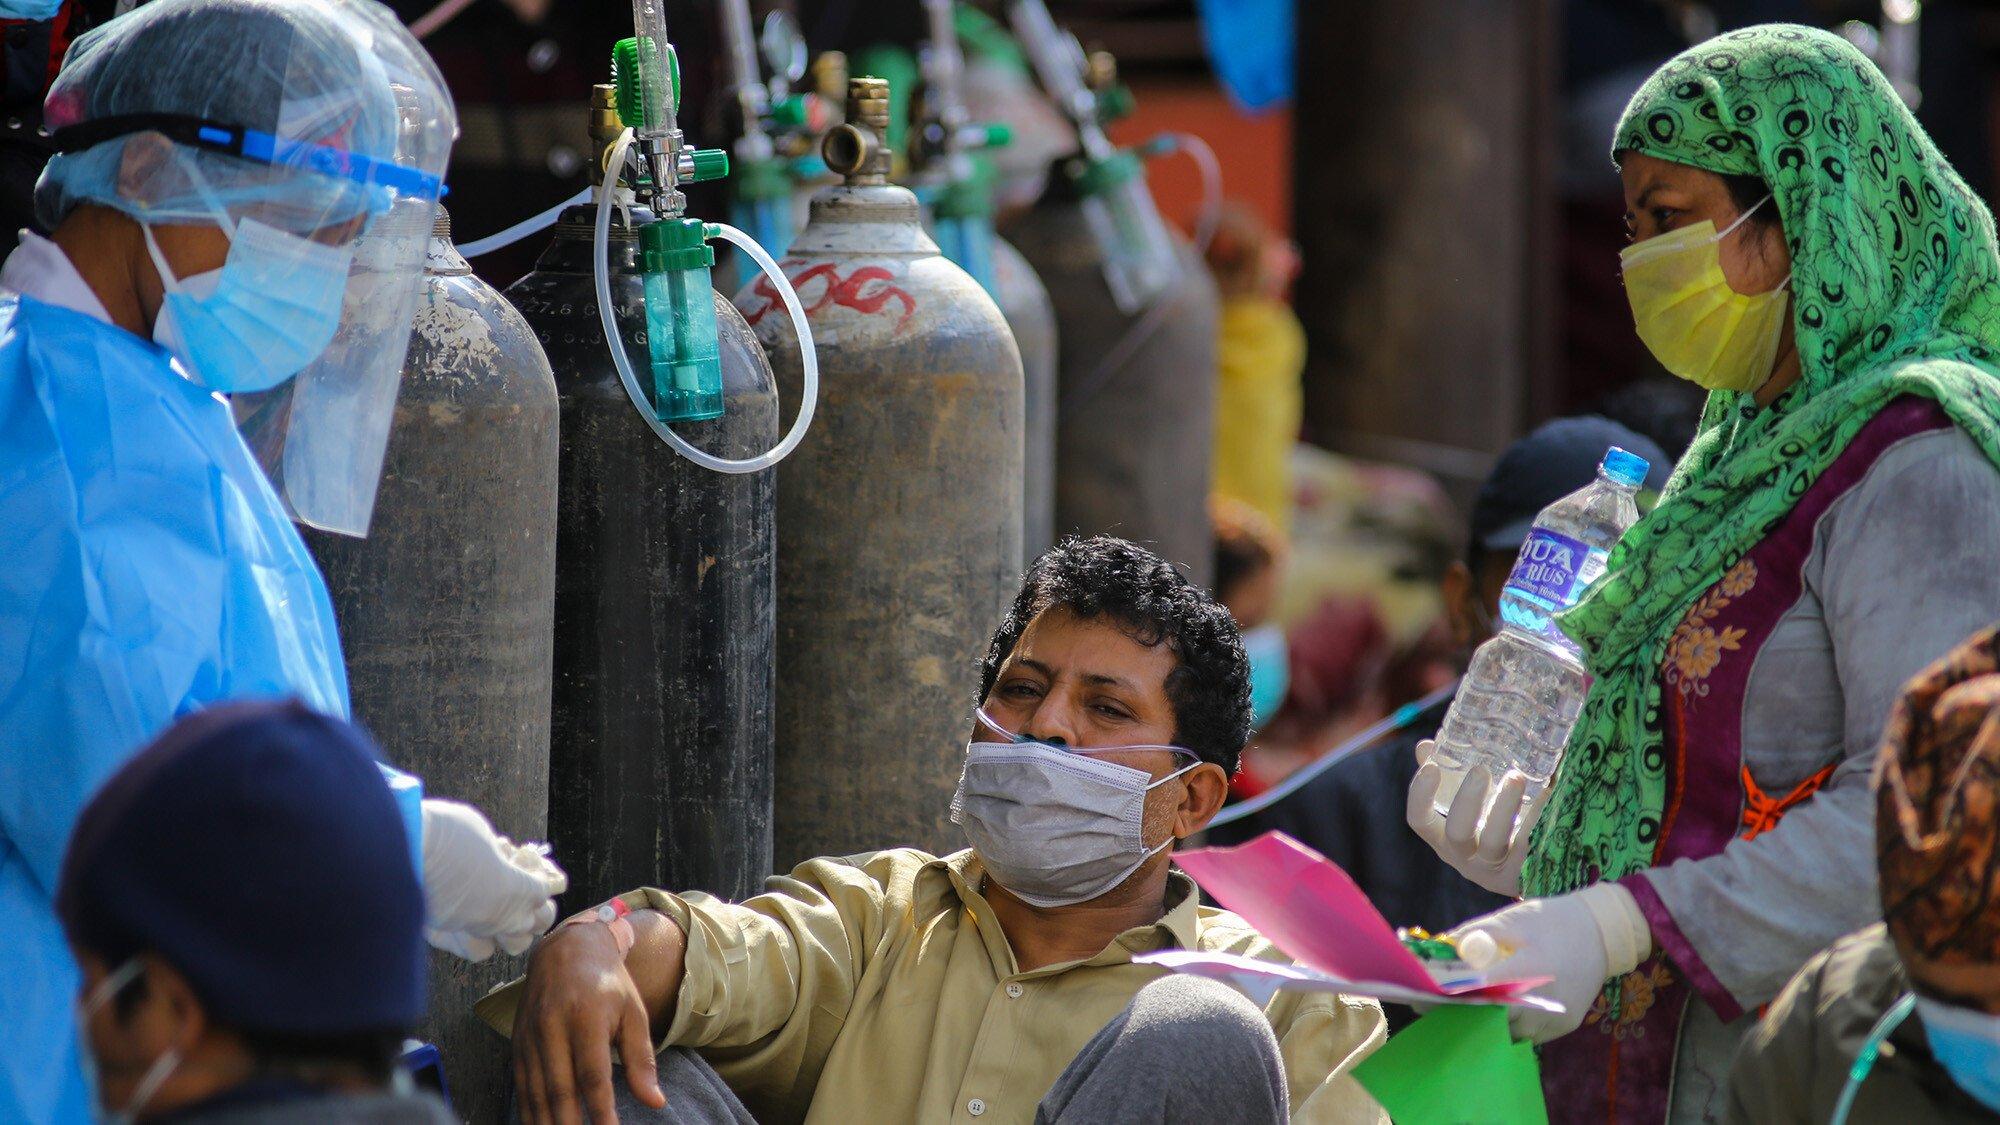 A doctor checks a Covid-19 patient while receiving oxygen outside a hospital in Nepal